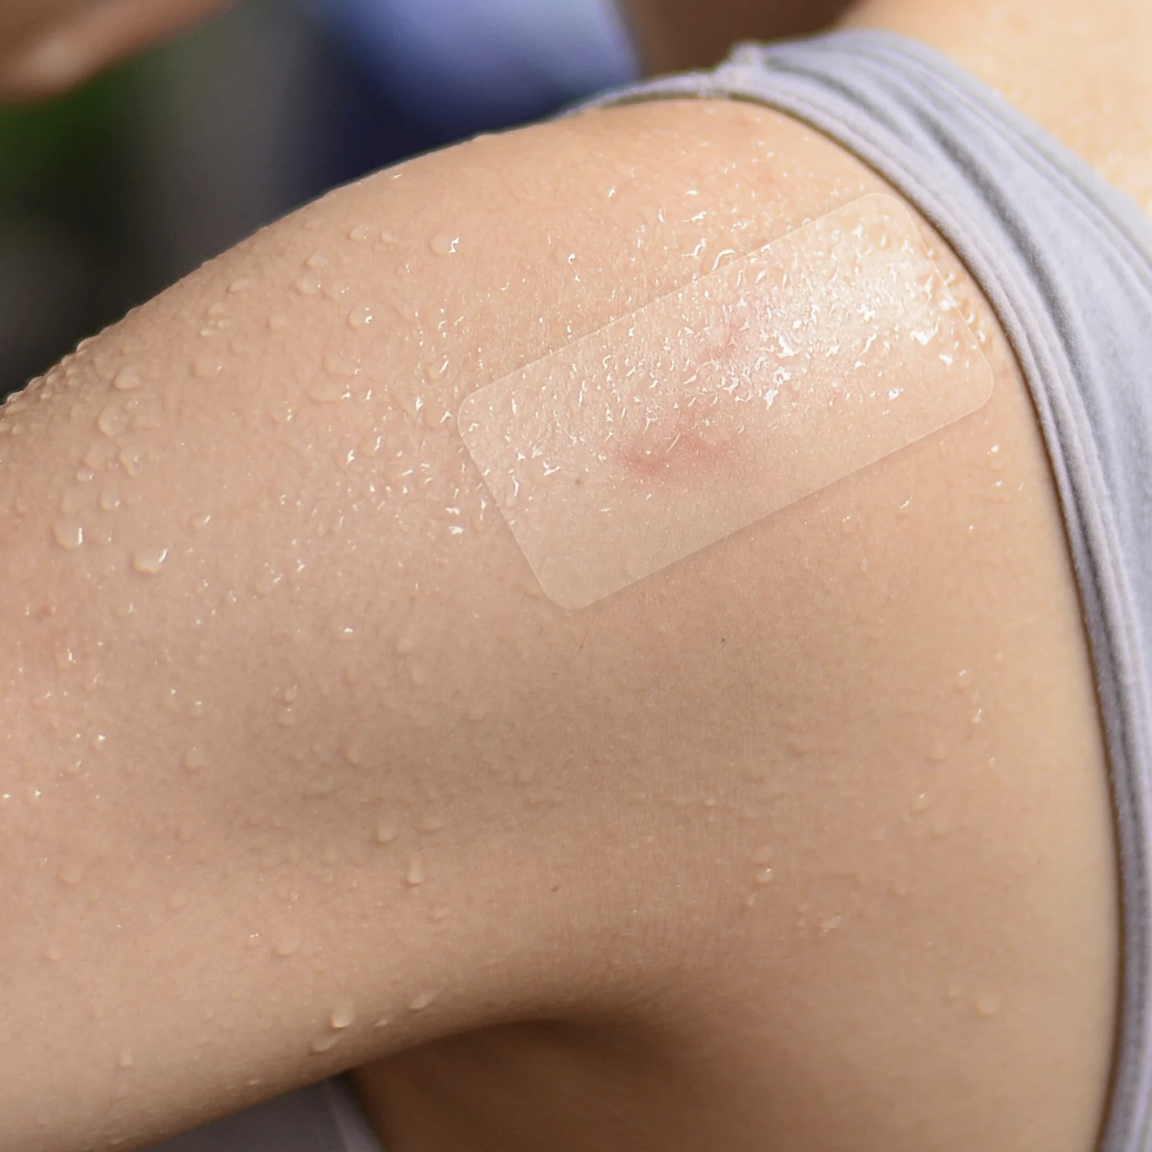 An Avarelle ZITOUT FIT 16CT pimple patch applied on a slightly moistened arm.